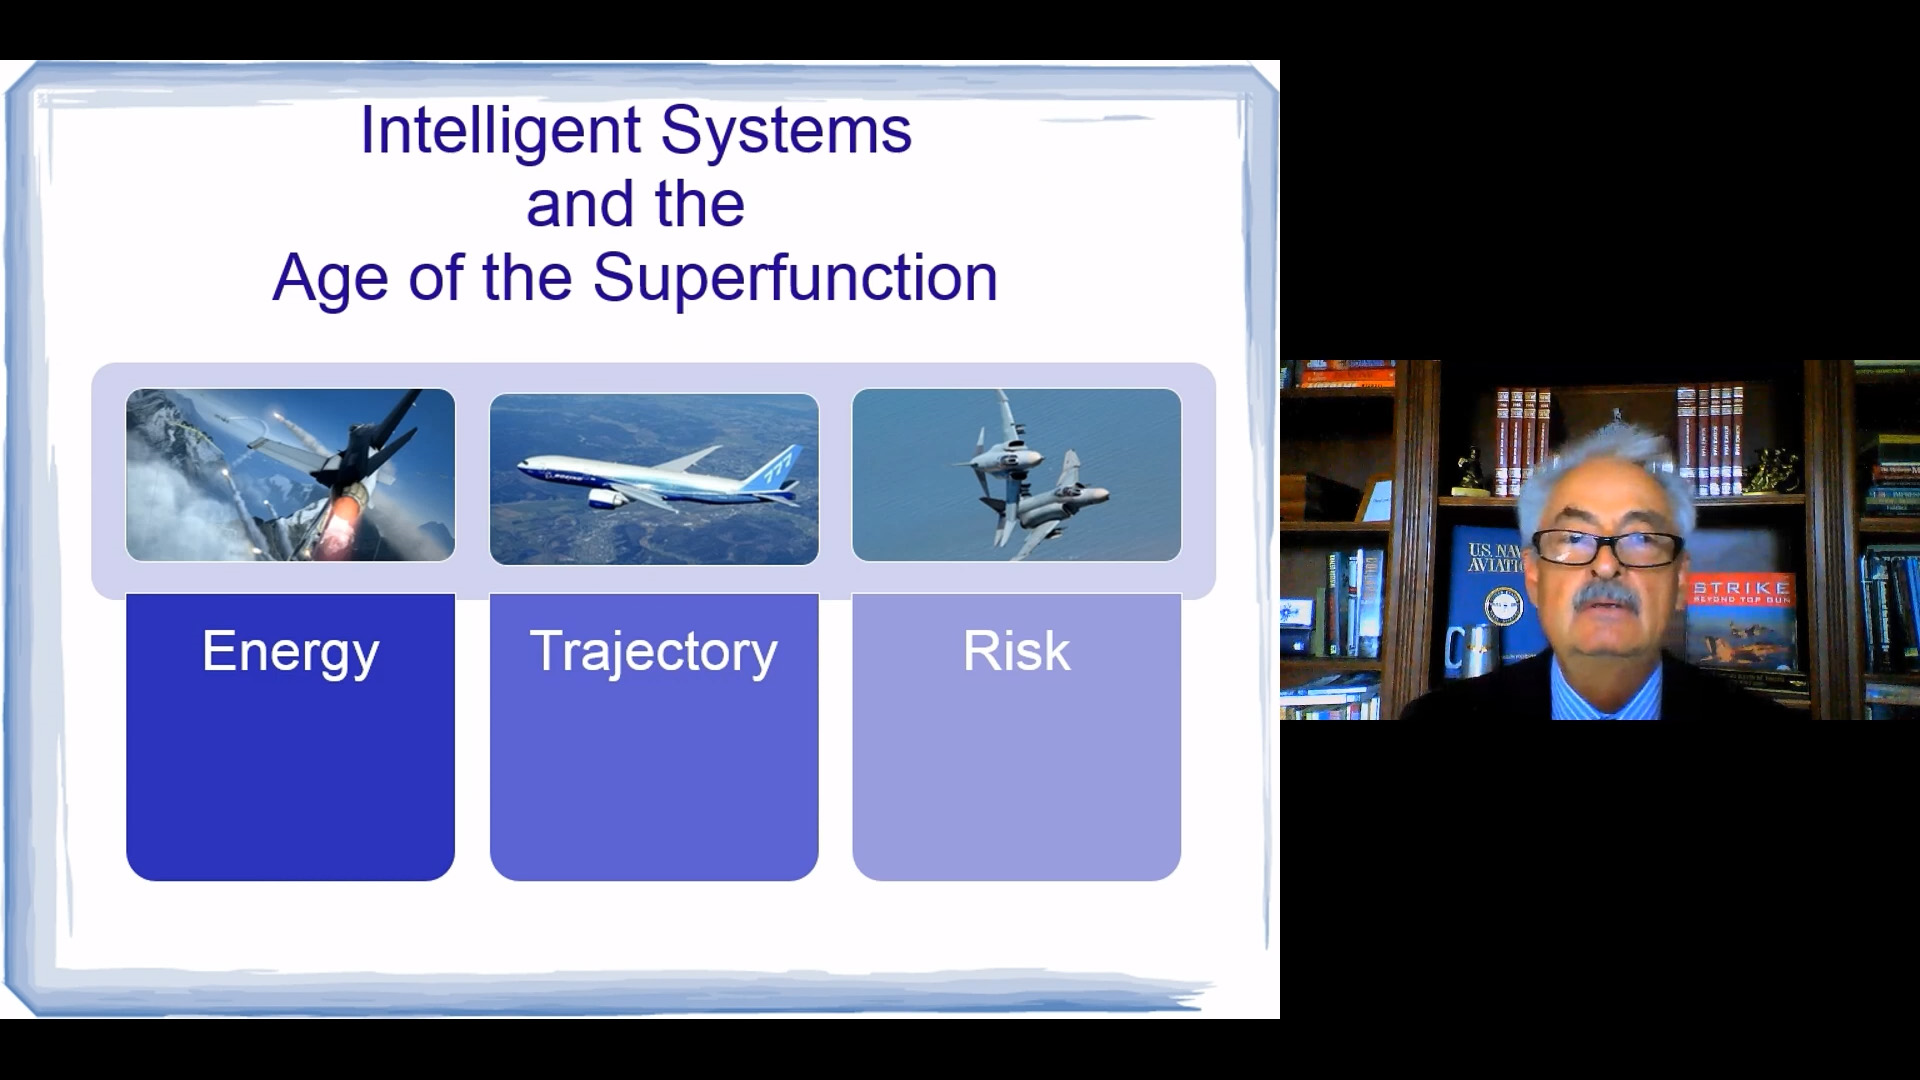 Intelligent Systems and the Age of the Superfunction